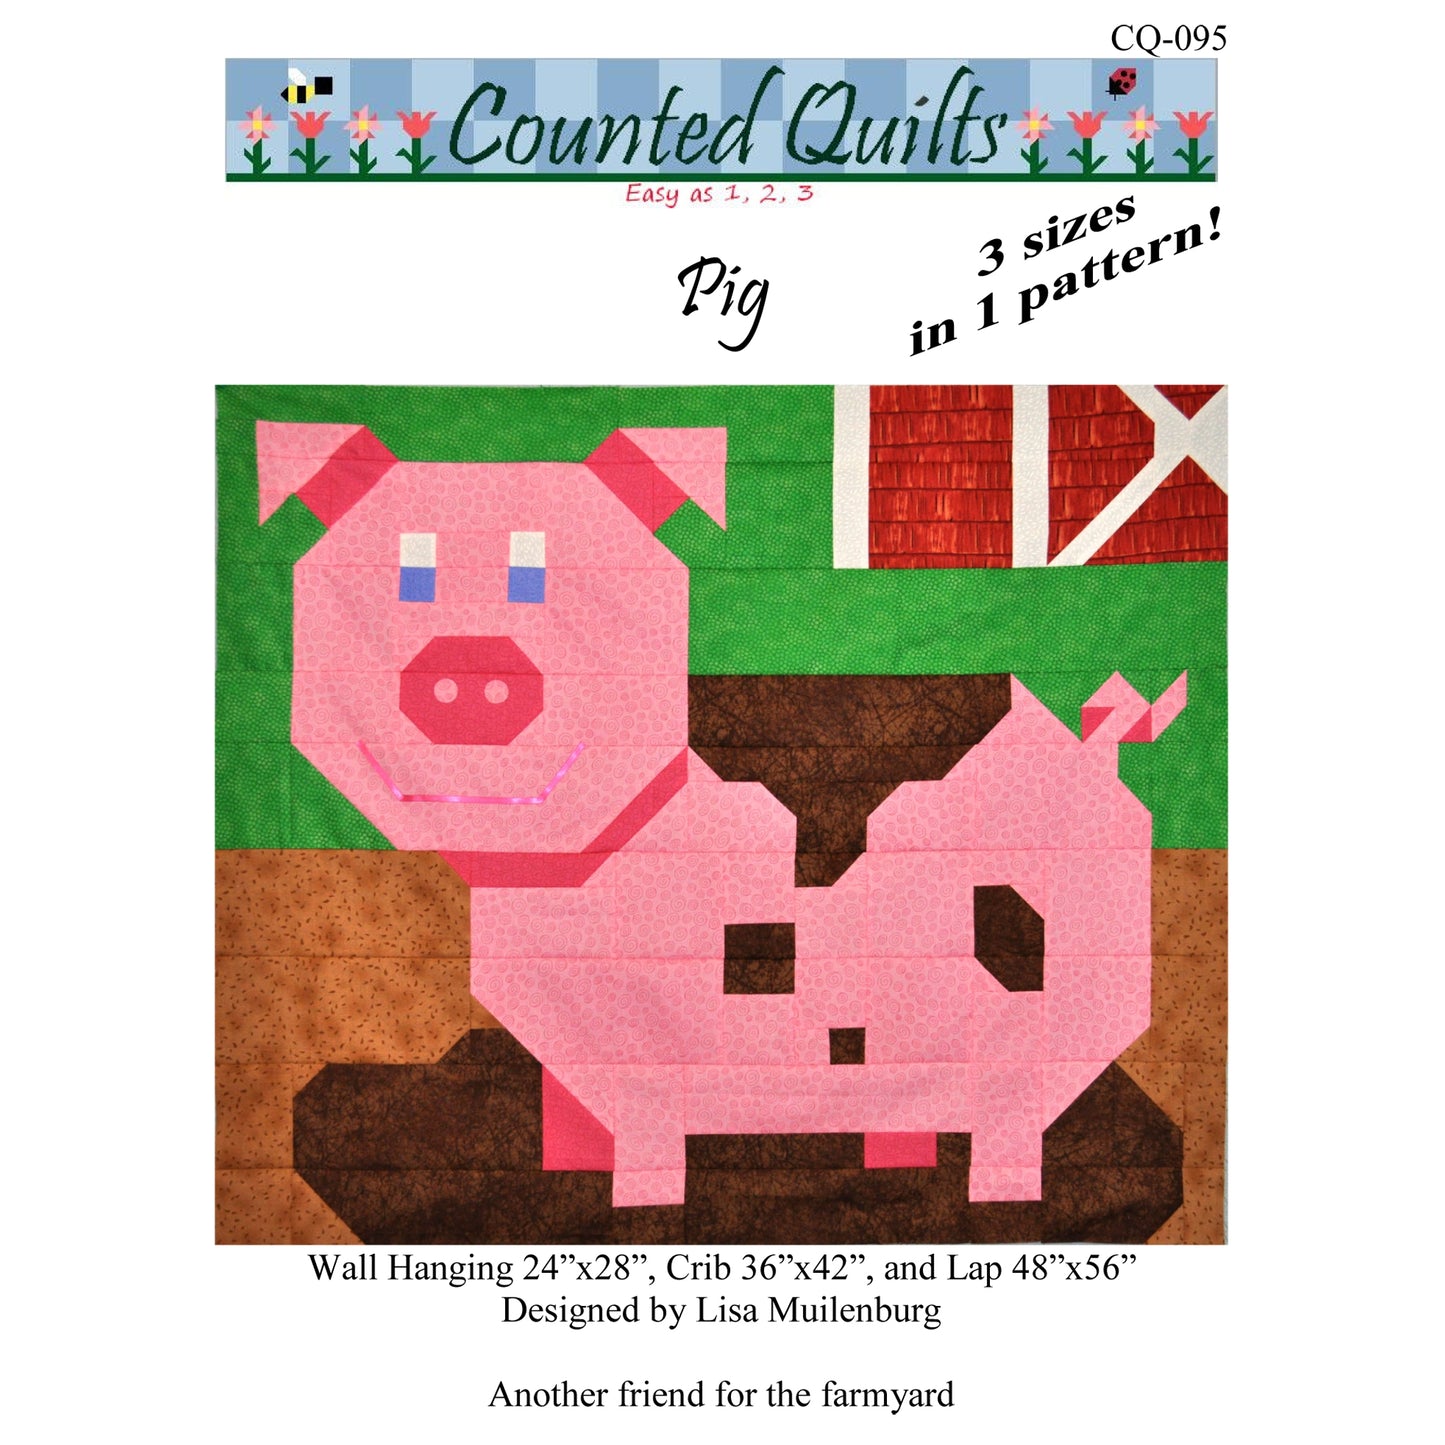 Cover image of pattern for Pig Quilt.